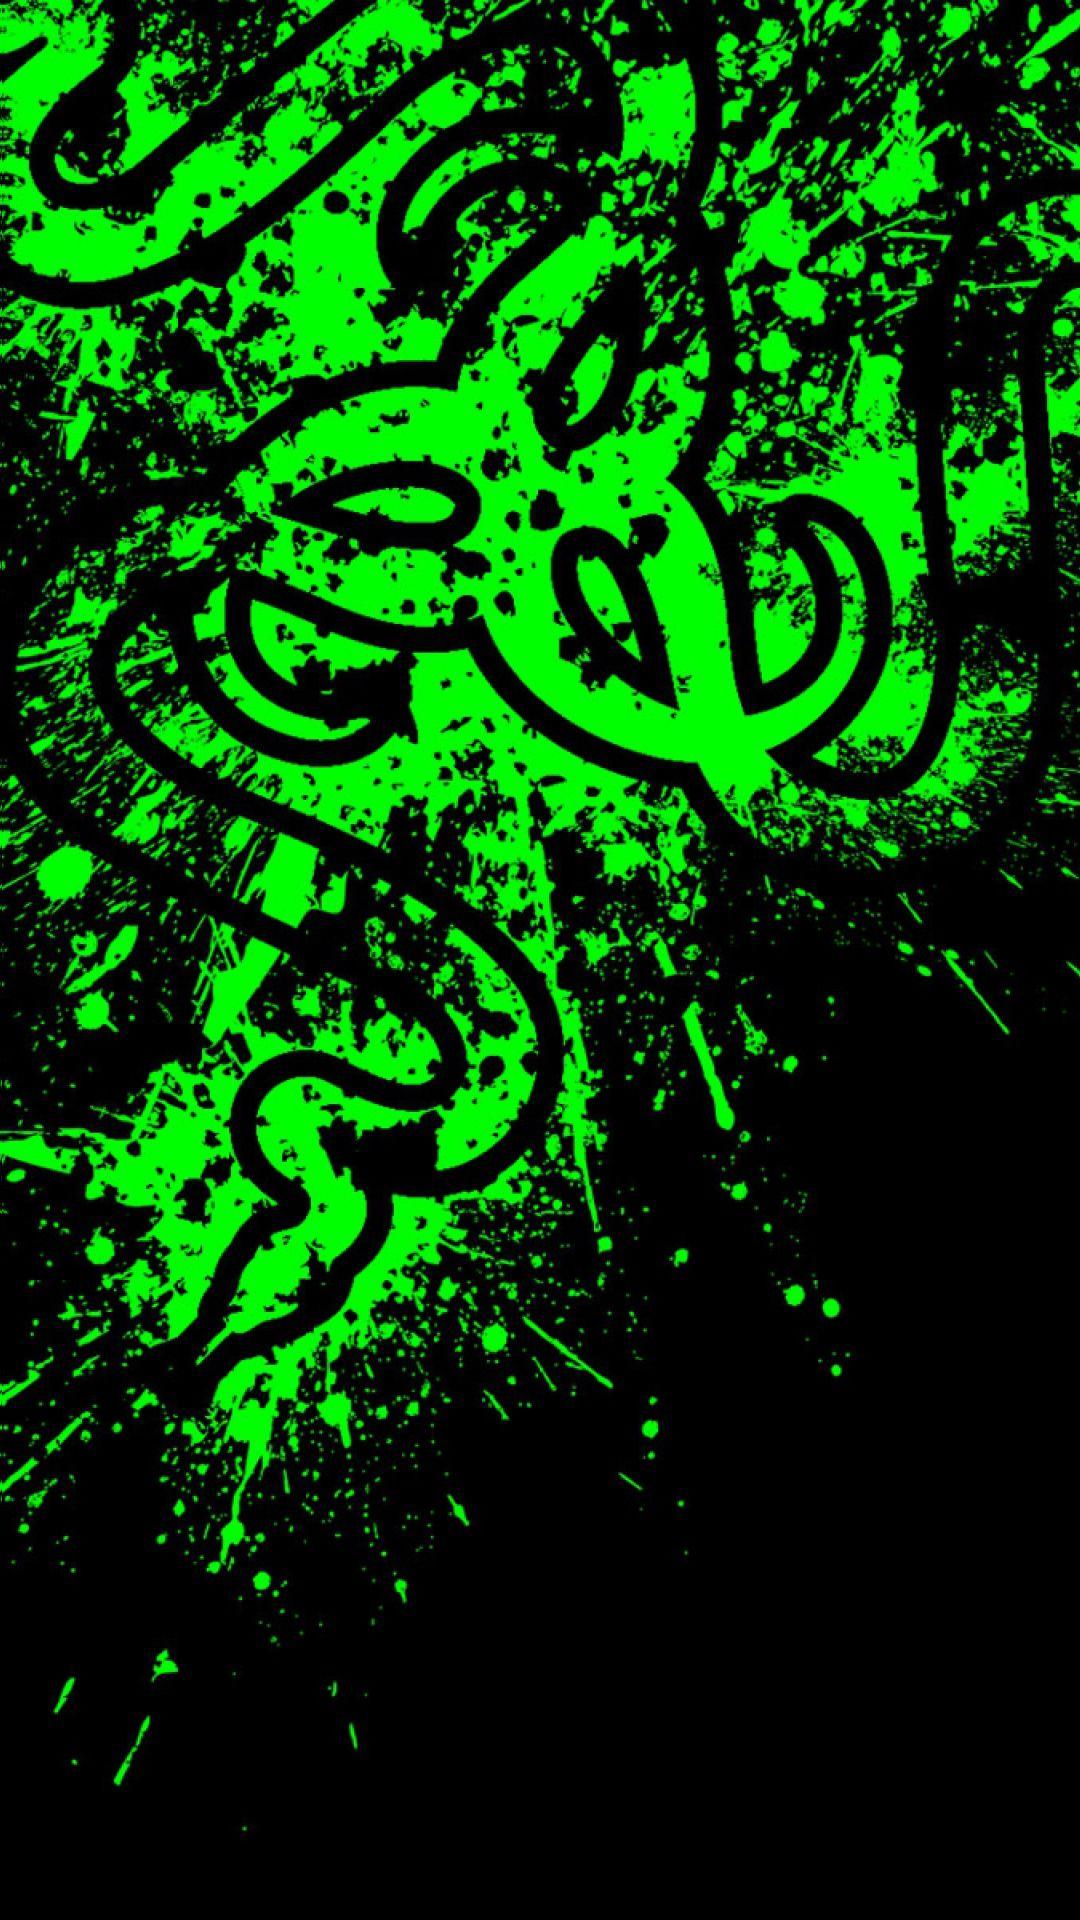 Razer HD Wallpaper For Your iPhone 6